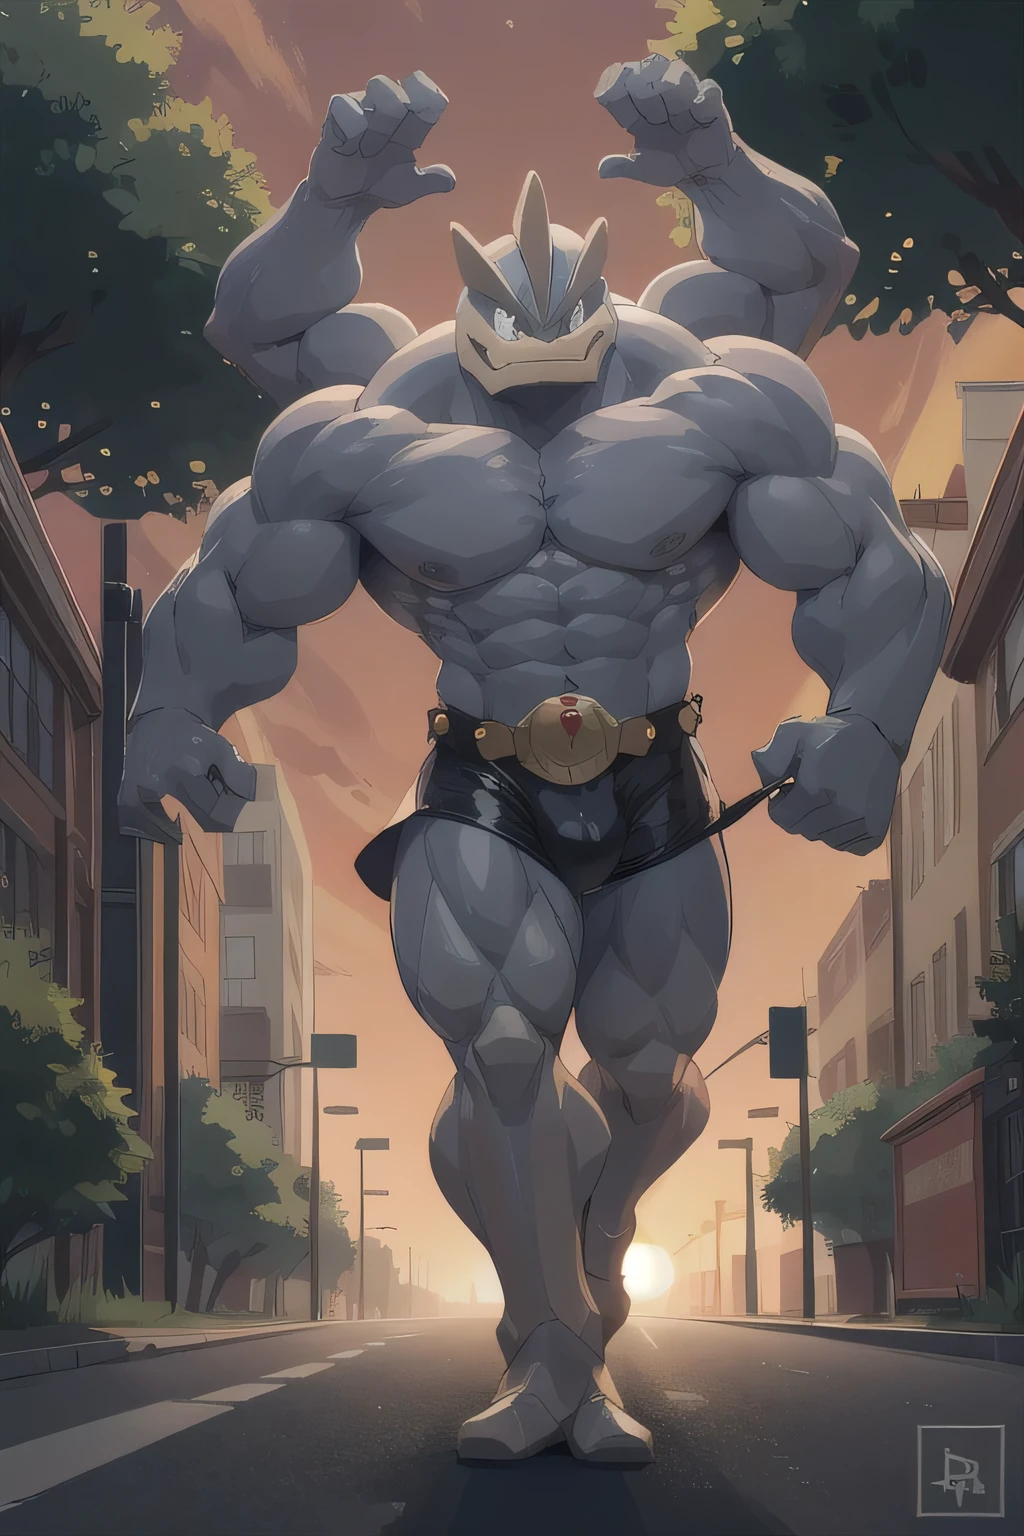 Machamp,pokemon, bald, grey skin, 4 arms, man, championship belt, briefs, looking at viewer, serious, smirk, red eyes, walking, on pavement, outside, road, 3-story buildings, trees, summer, orange sky, high quality, masterpiece,